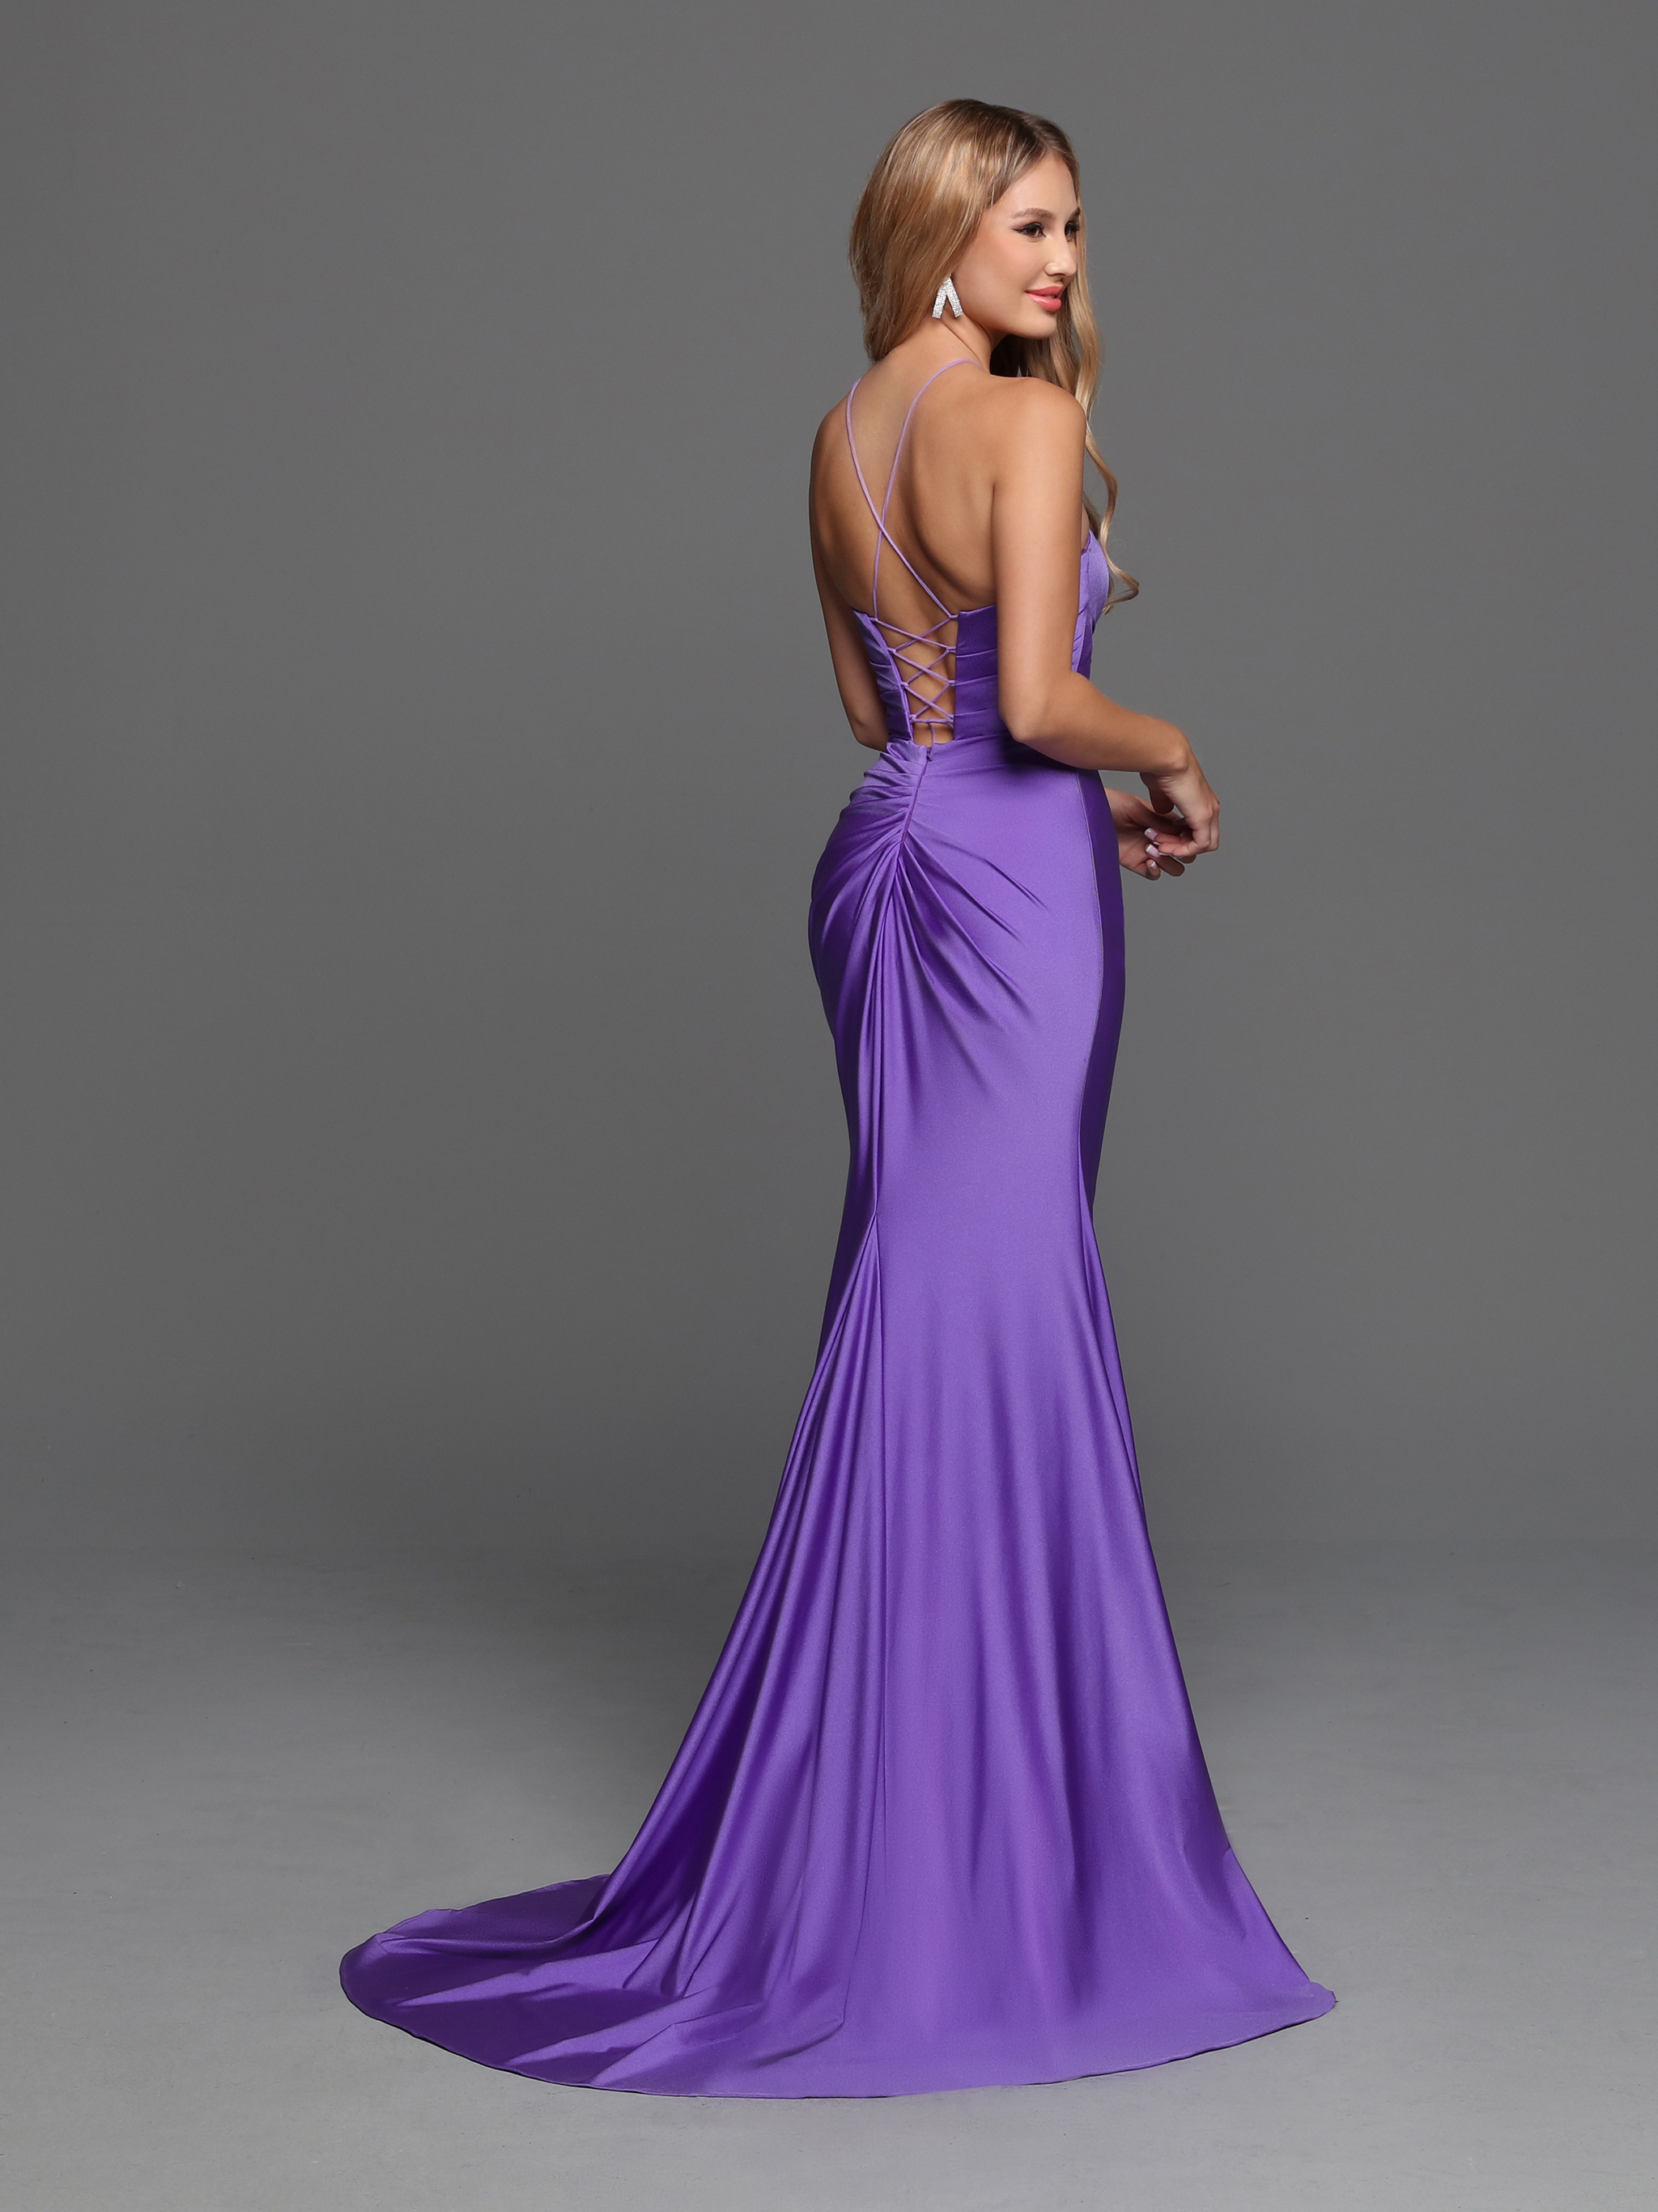 Image showing back view of style #72293